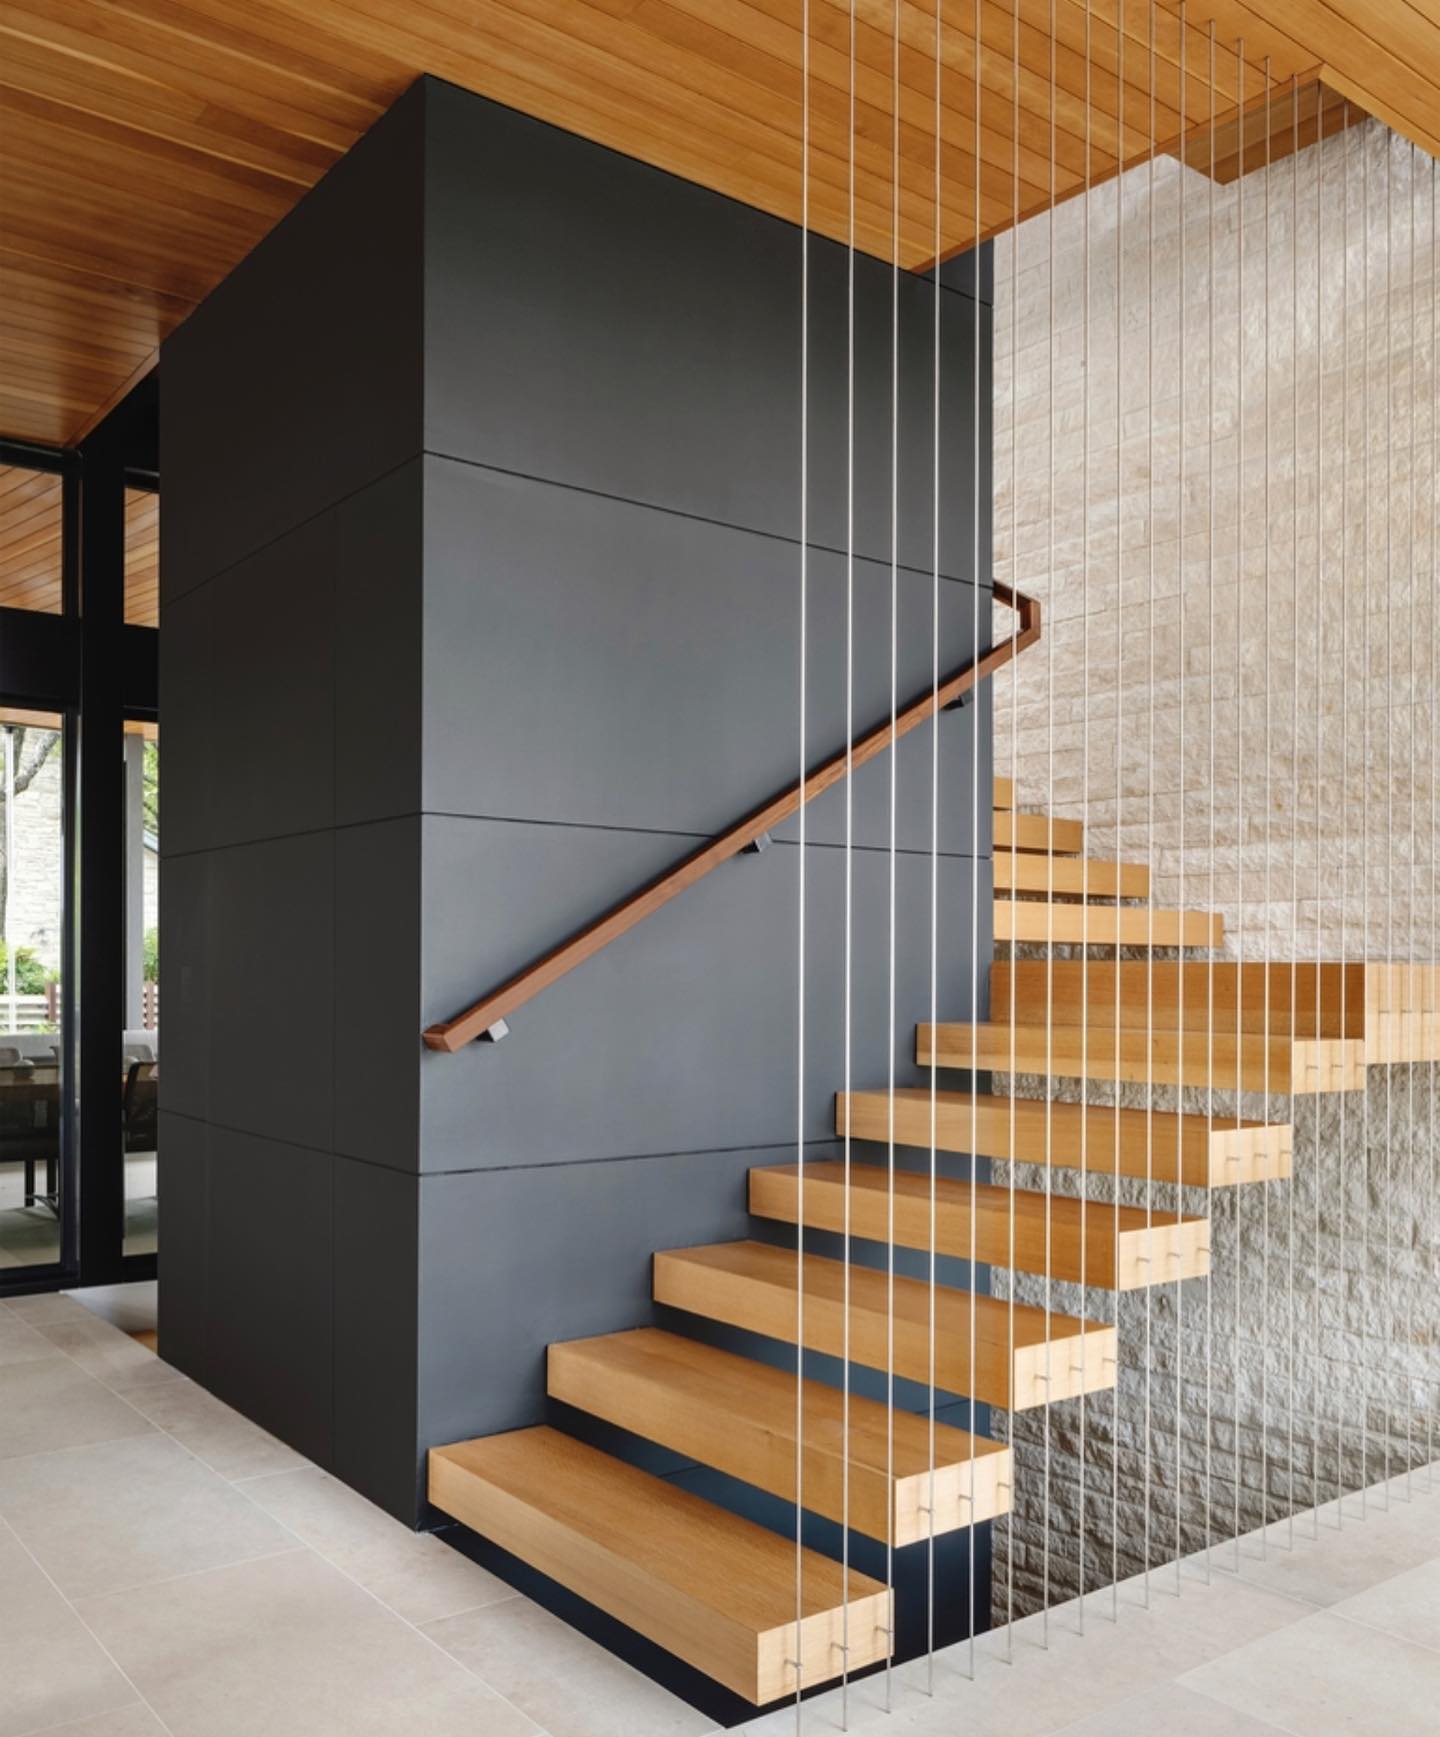 Cantilevered stair treads appear so simple and light. Honestly it takes tons of steel to make it happen.